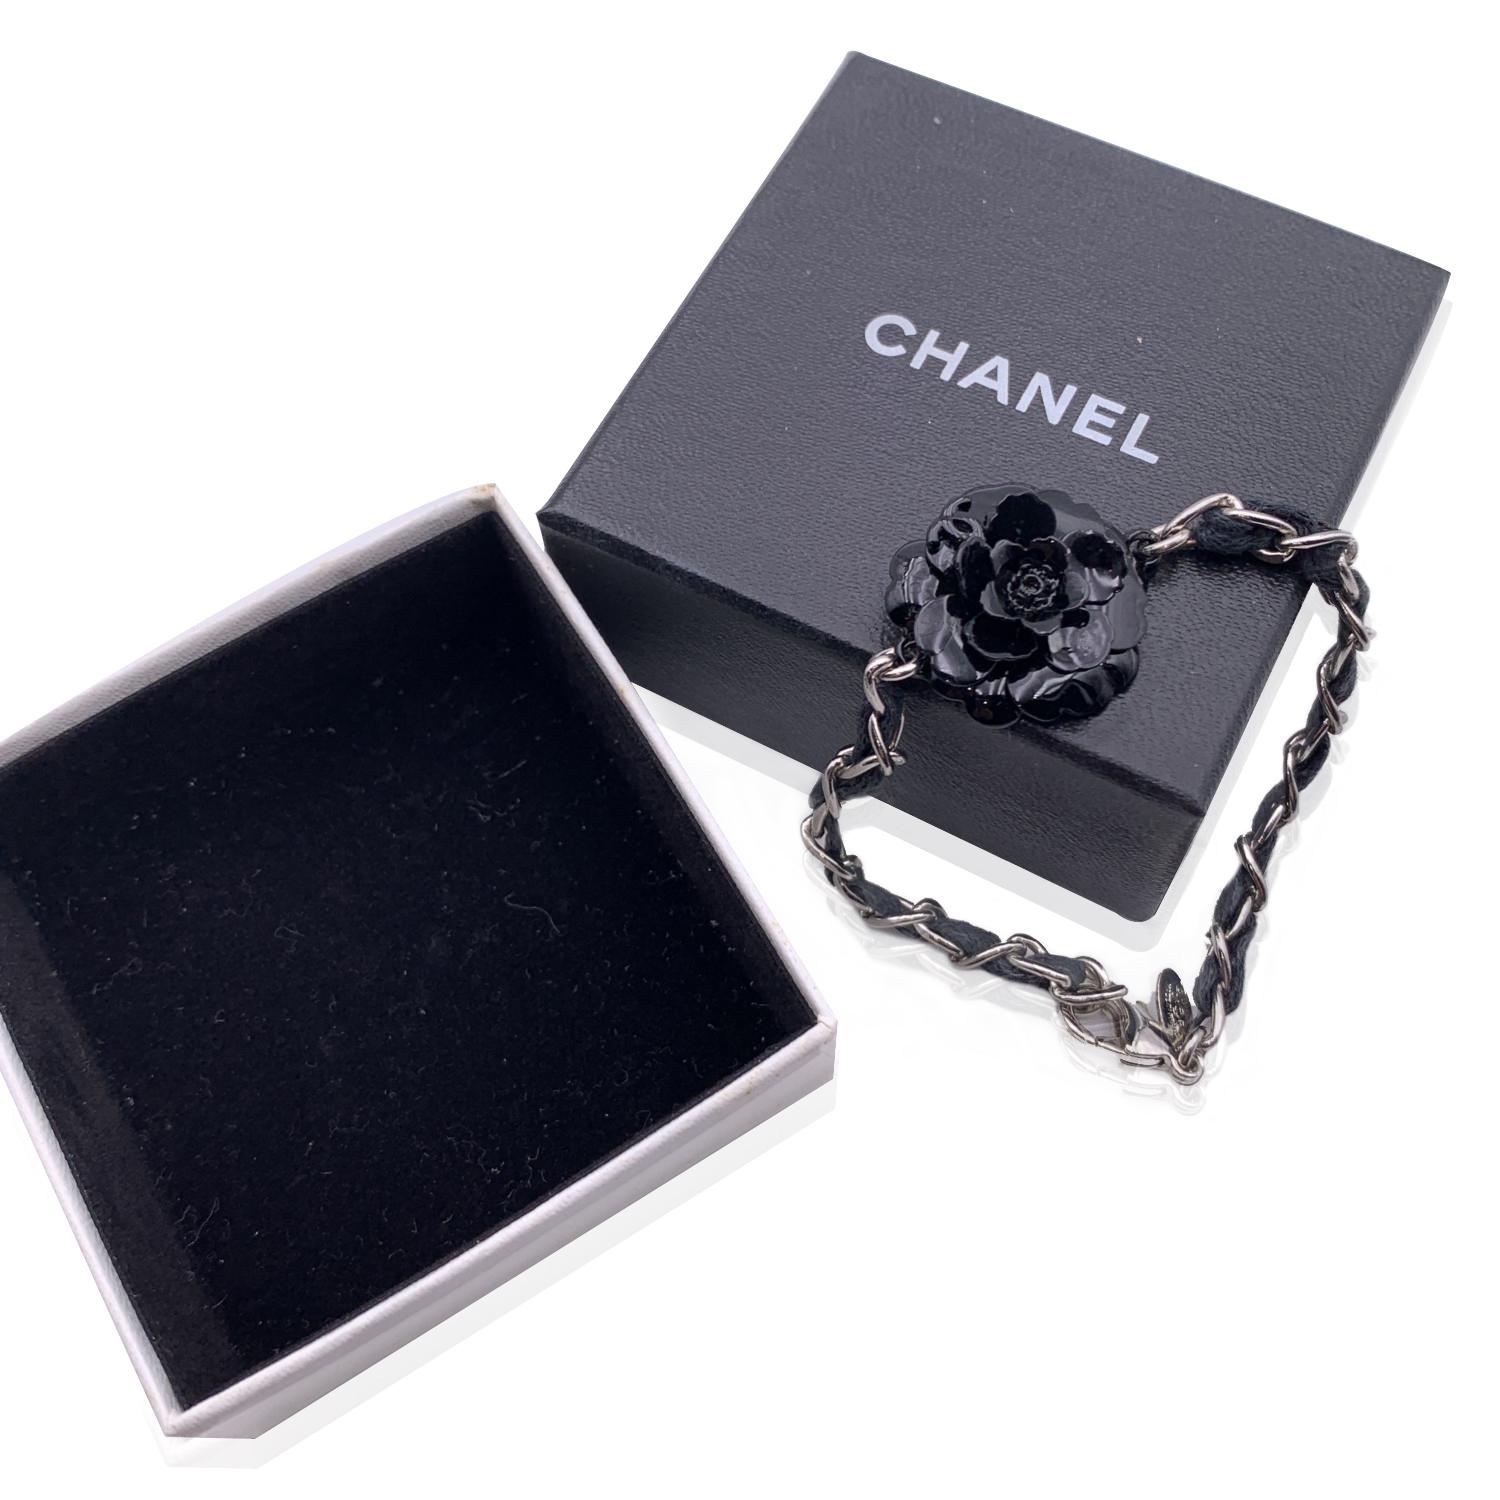 CHANEL silver metal chain bracelet with interwoven black leather. It features a black resin camellia flower in the center. Lobster closure. Marked 'CHANEL 04 CC P Made in France'. Total length: 7 inches - 17.8 cm

Condition

A - EXCELLENT

Gently